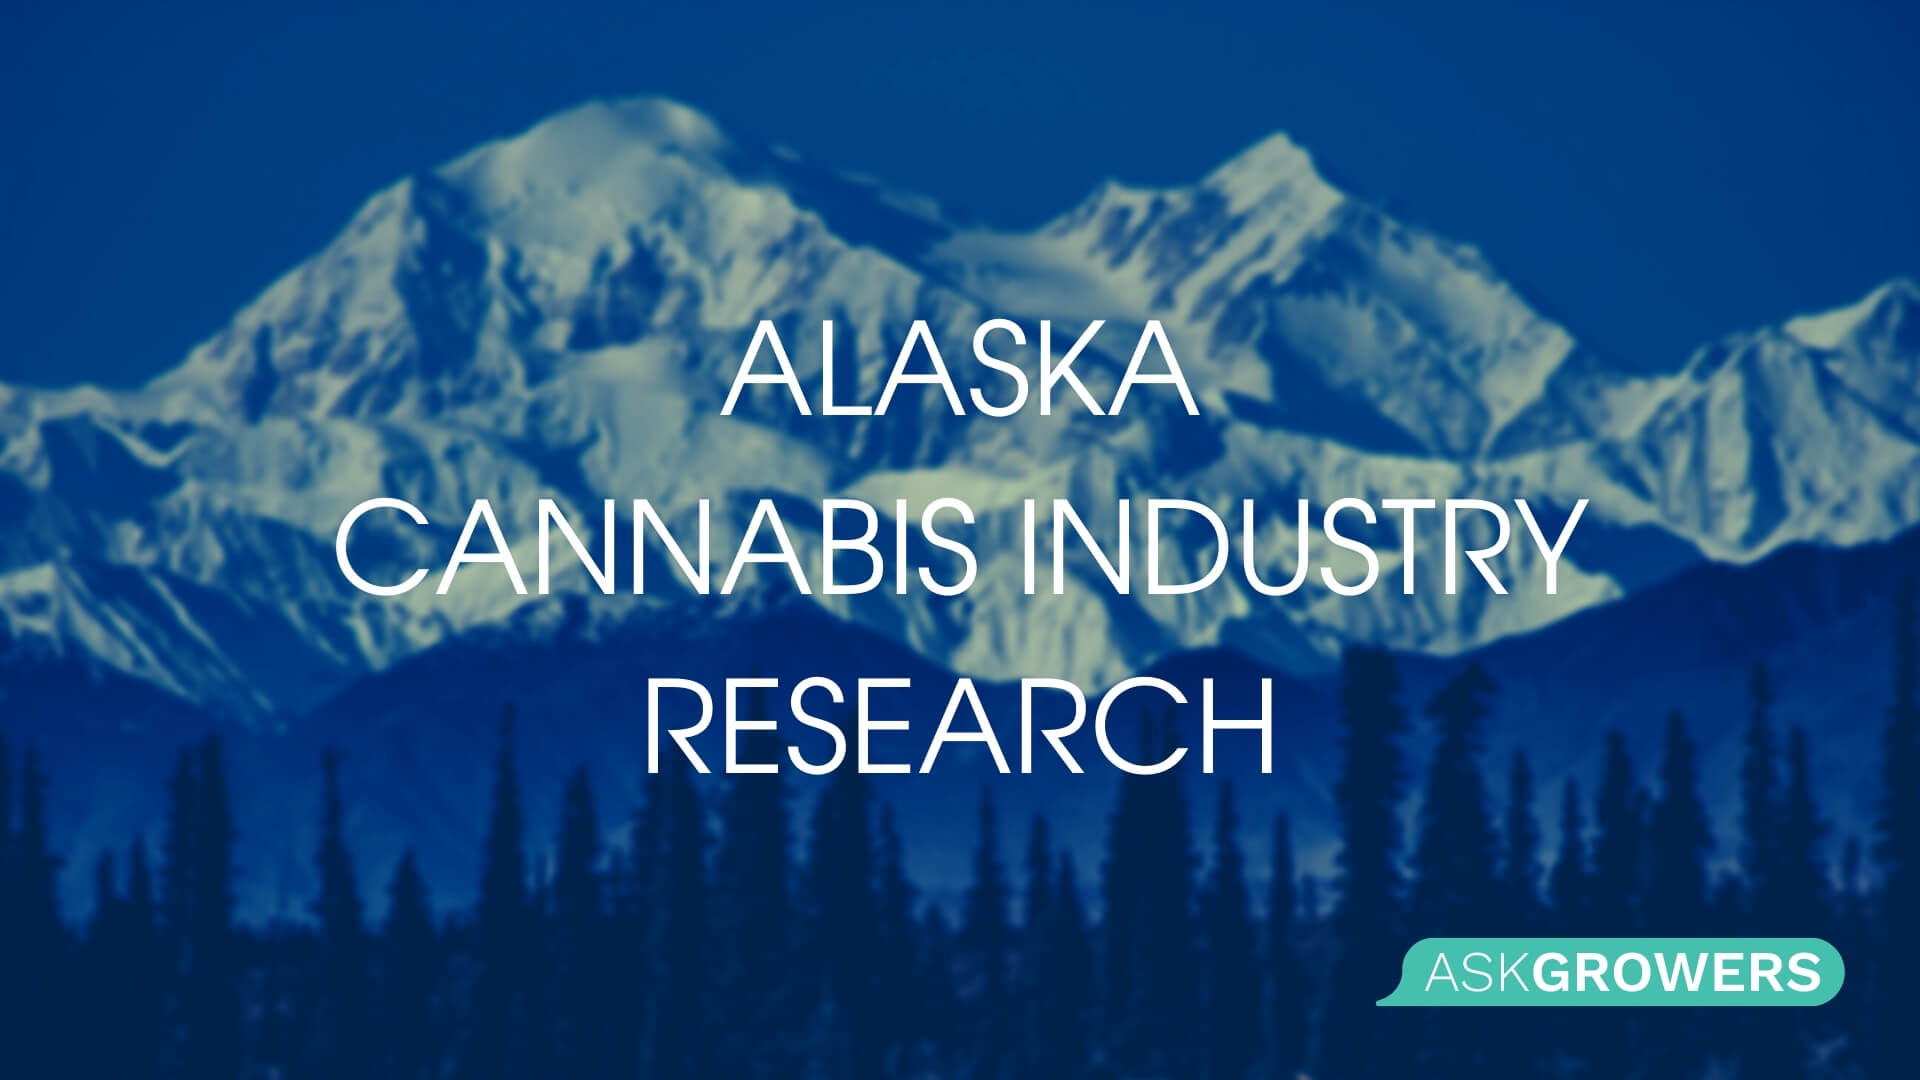 Alaska's Cannabis Industry Lost About 20% of Profits Due to Declining Tourism in 2020